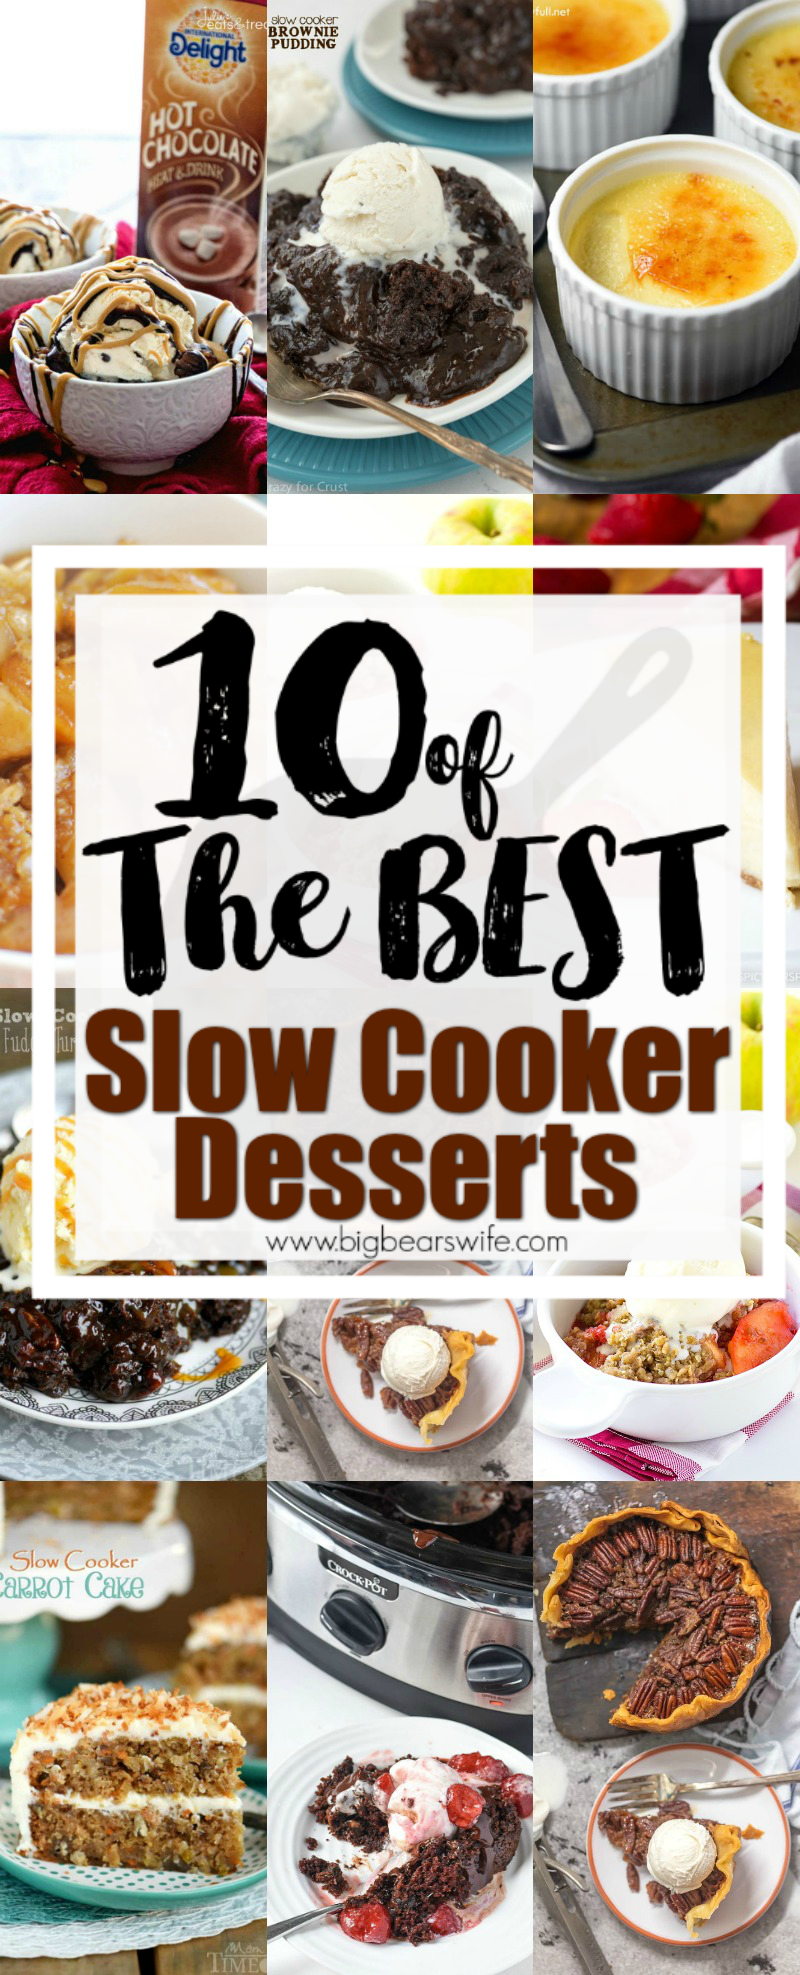 10 of the Best Slow Cooker Desserts - Dessert doesn't have to be an everyday thing but when you've been working on dinner all evening it's nice to have a dessert waiting for you in the slow cooker! You'll love 10 of the Best Slow Cooker Desserts that I've found, they're great for after dinner and for parties! #slowcookerdesserts #slowcookerrecipes via @bigbearswife